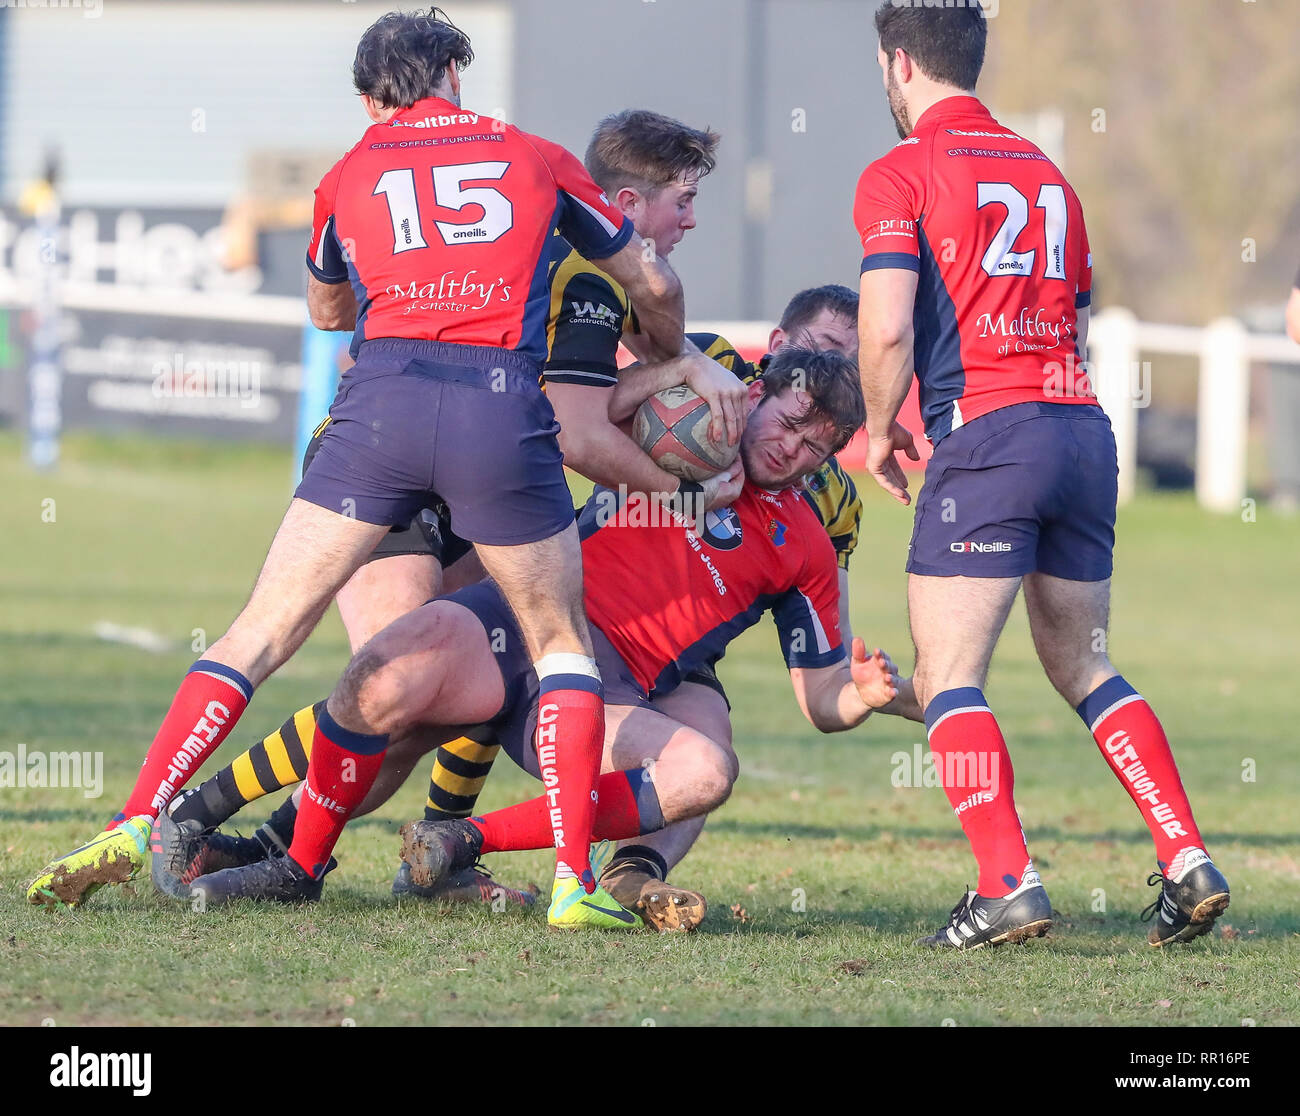 23.02.2019 Hinckley, Leicester, England. Rugby Union, Hinckley rfc v Chester rfc.   Adam King (Chester) is tackled    during the RFU National League 2 Stock Photo